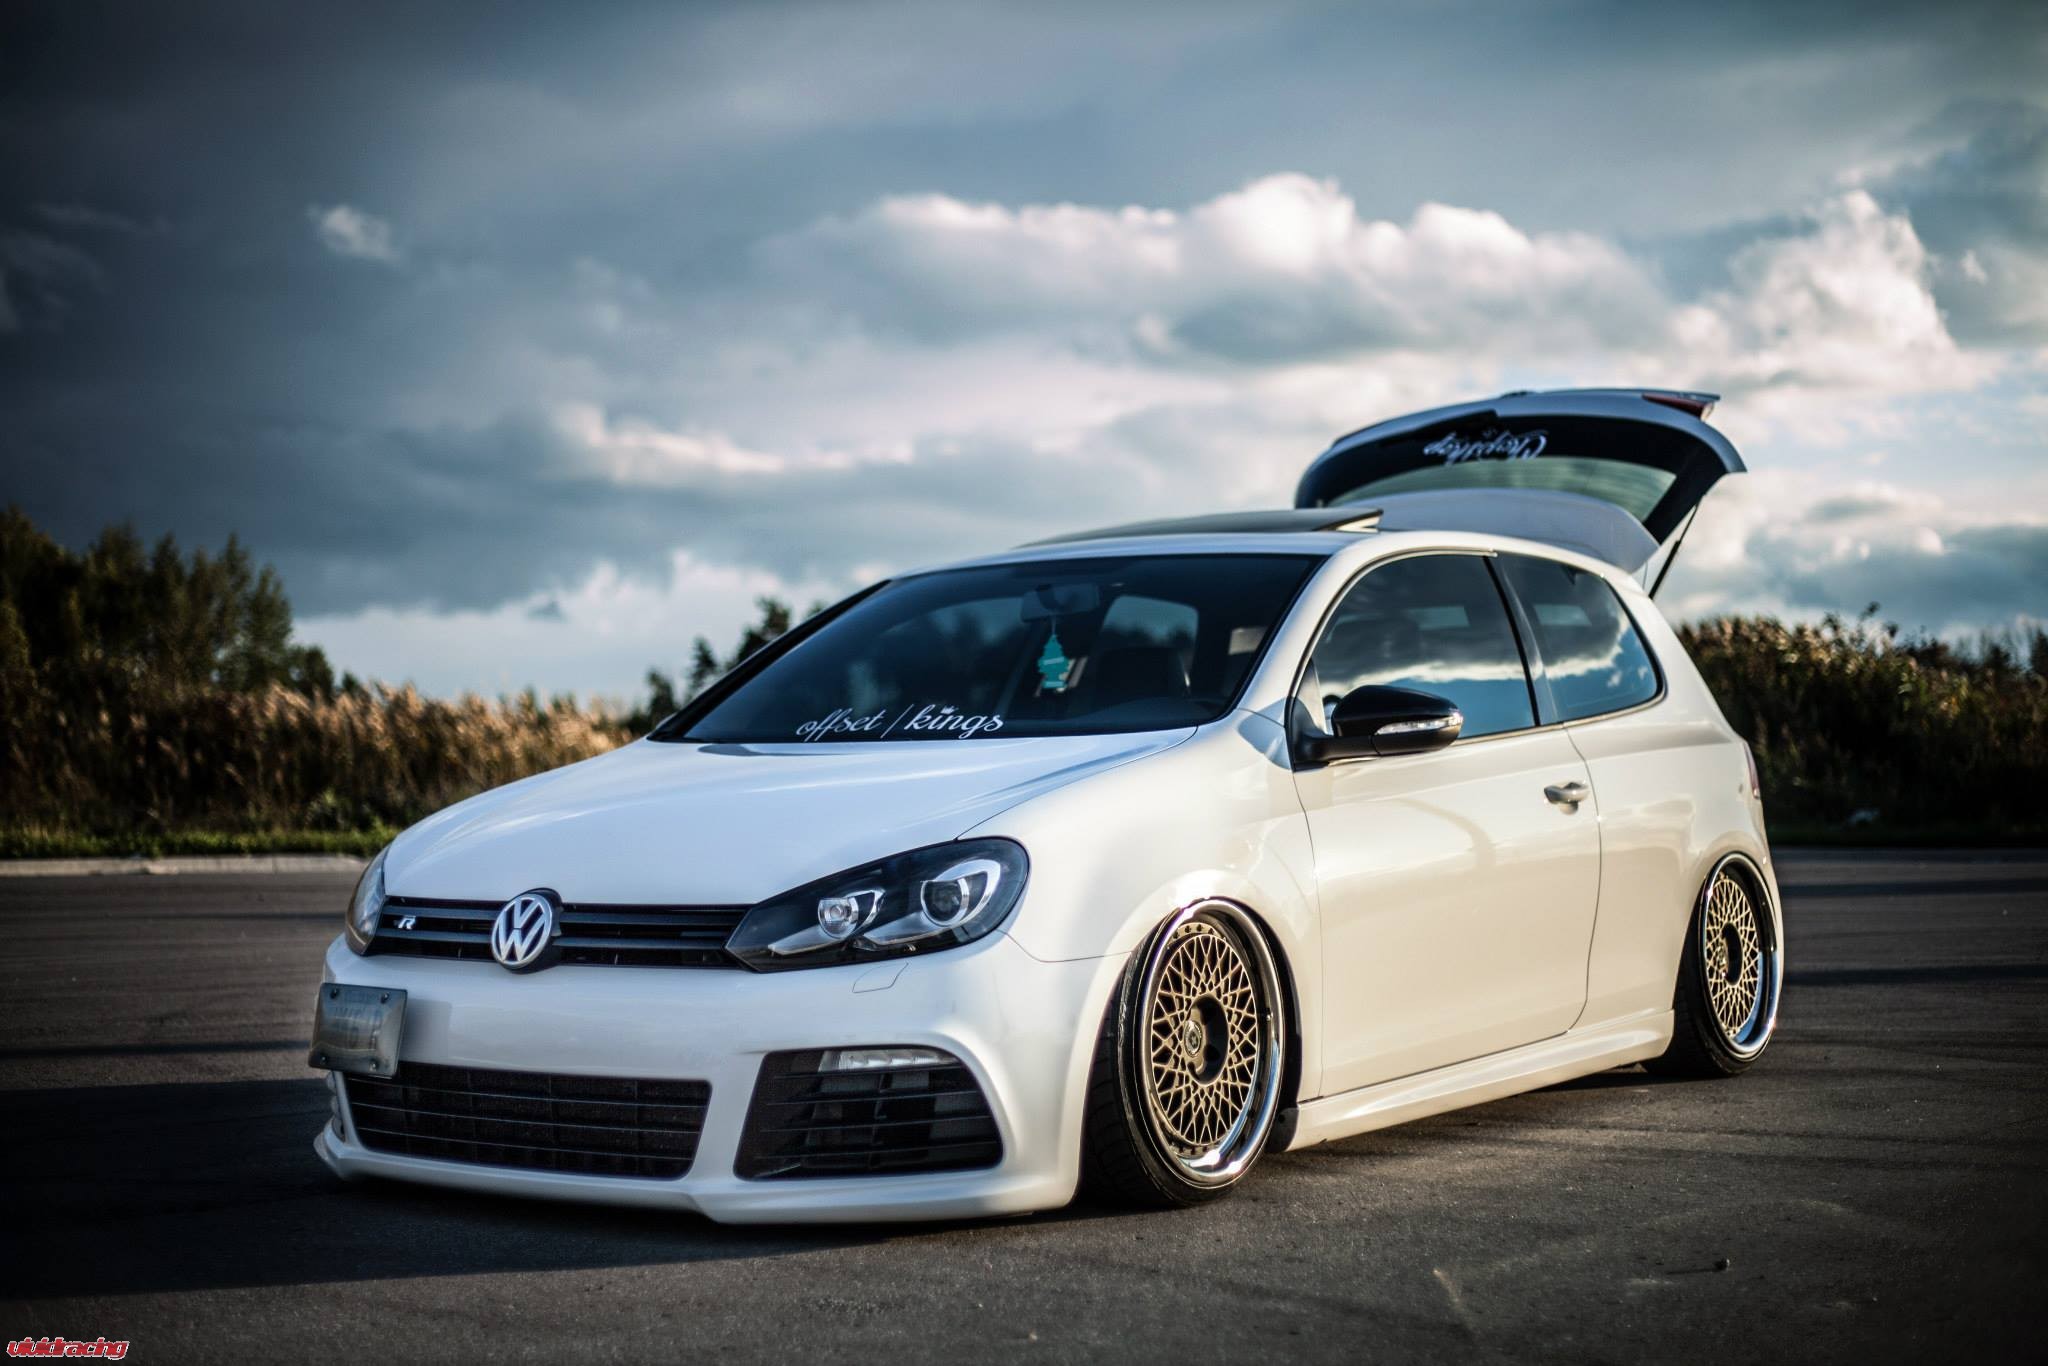 VW Golf R3 Fitted with Status Racing Seats – Vivid Racing News